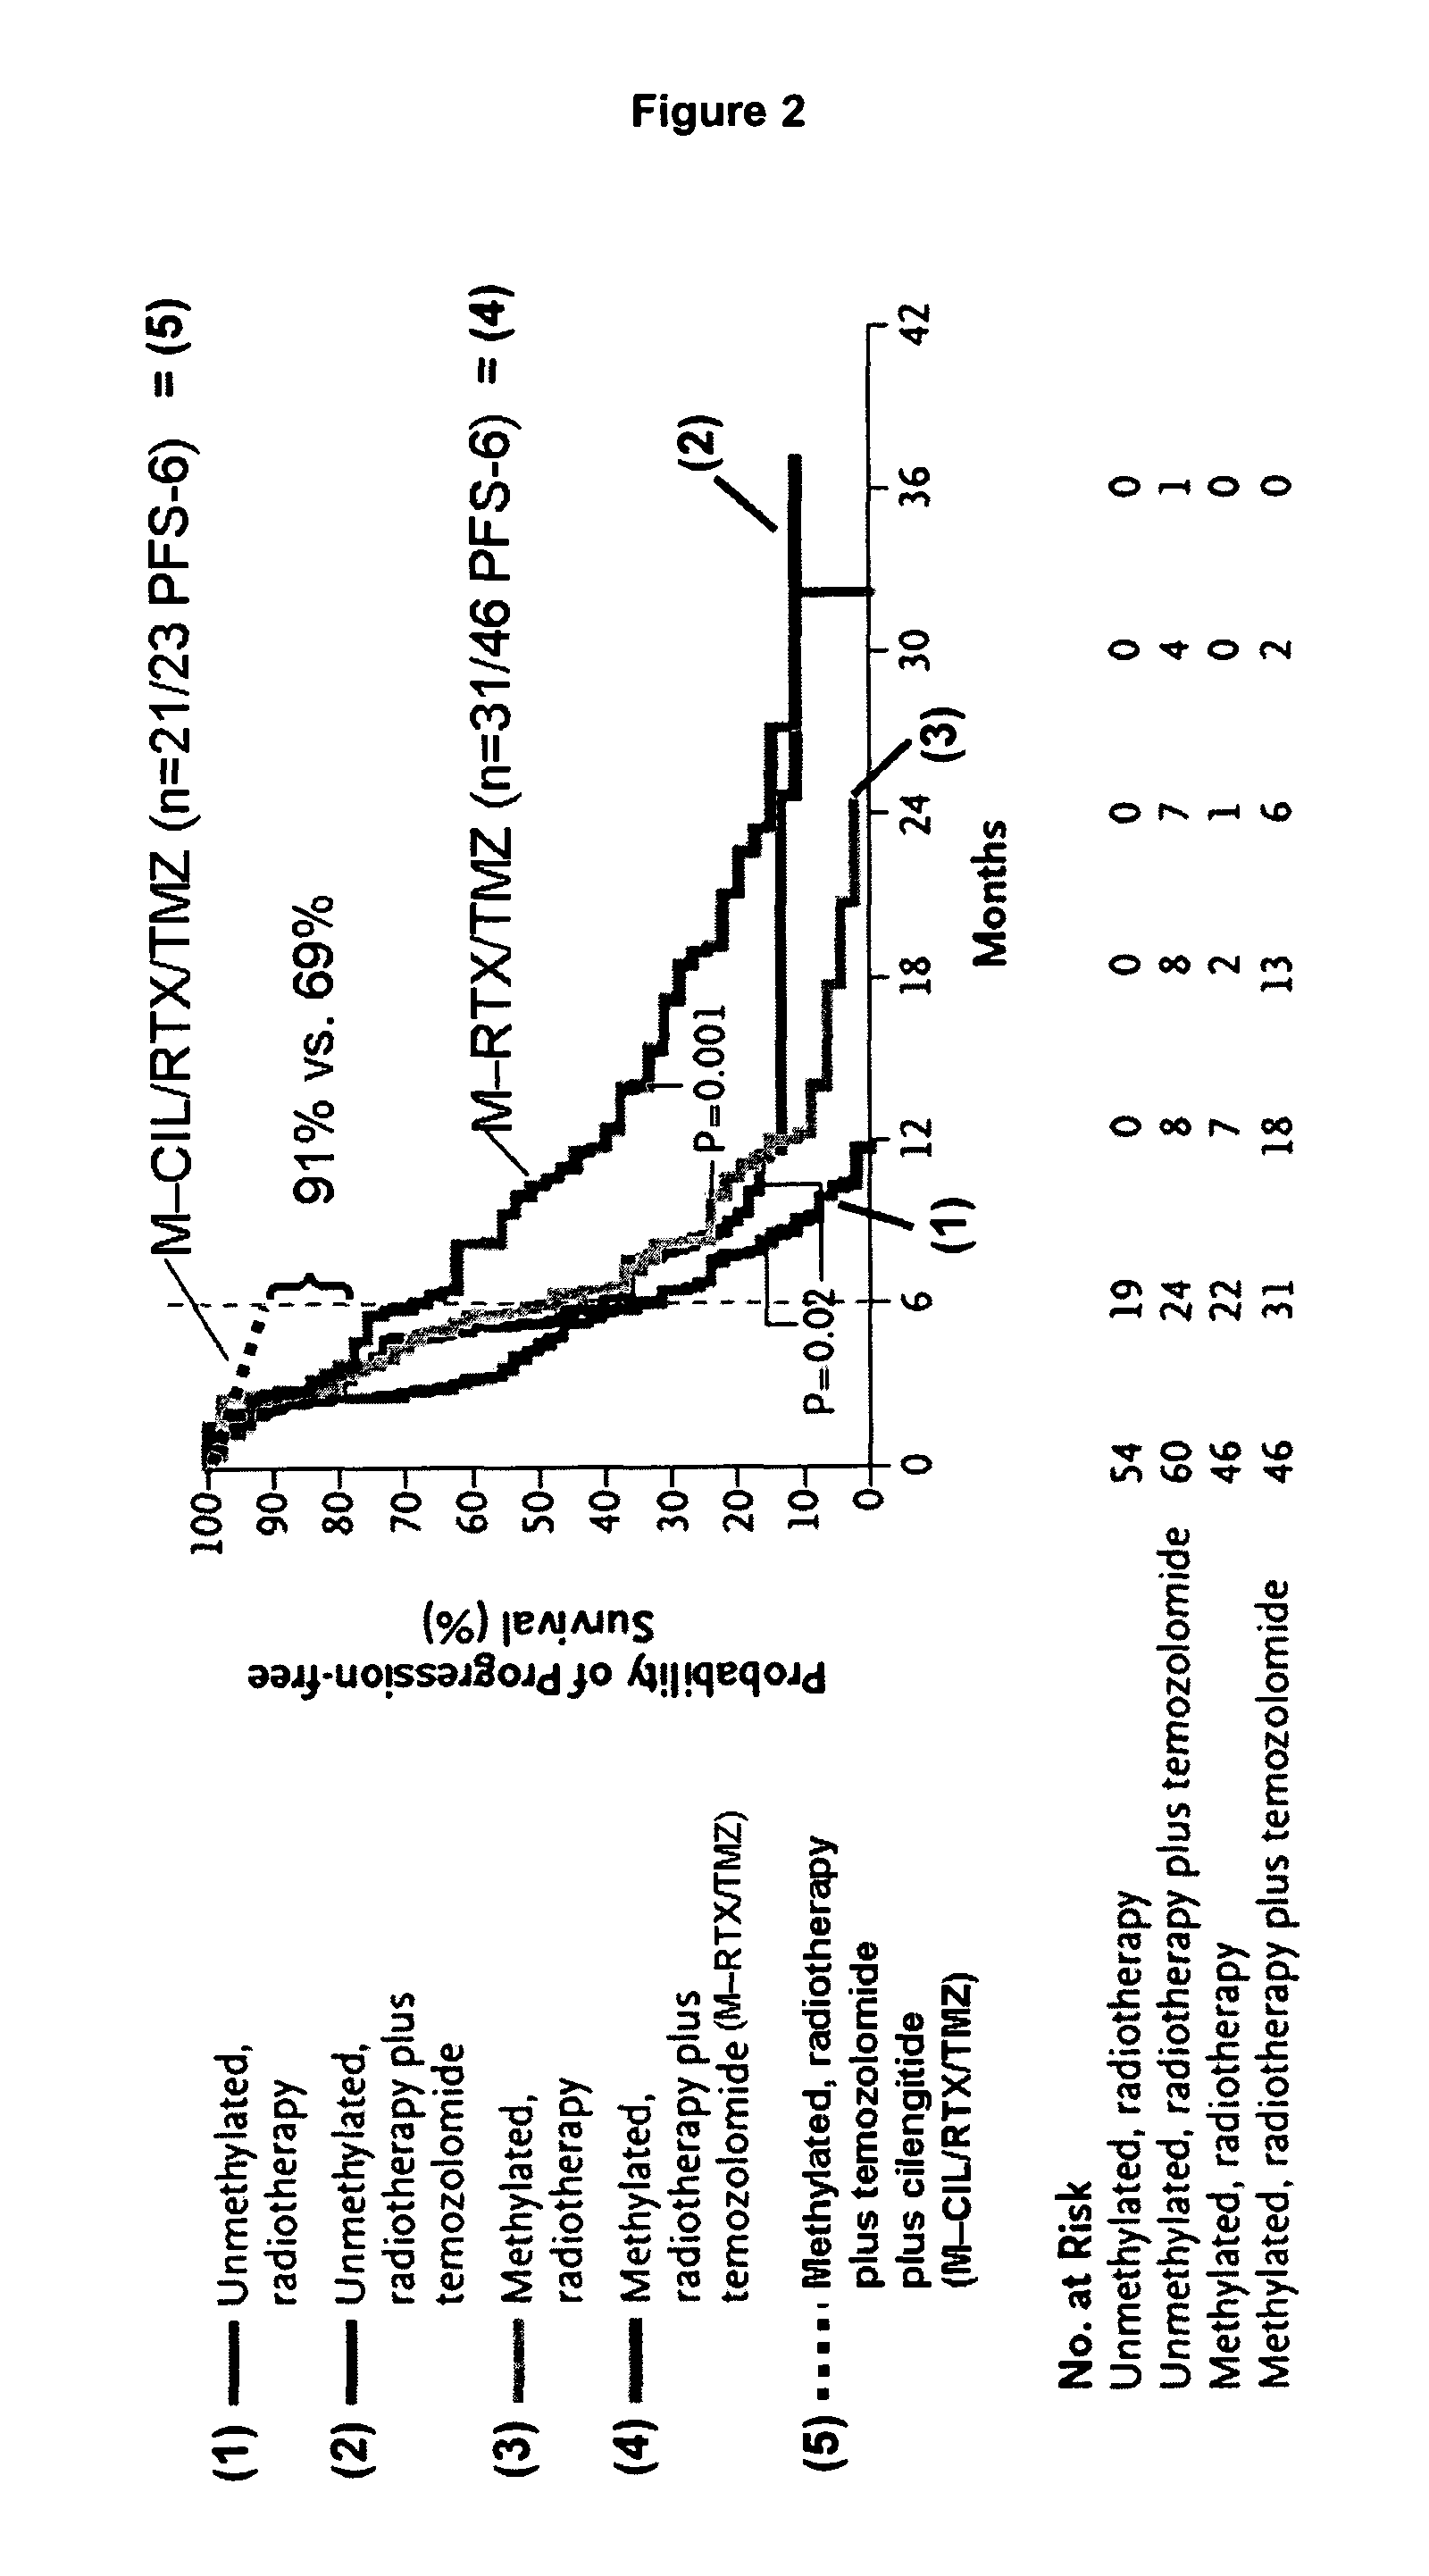 Continuous administration of cilengitide in cancer treatments